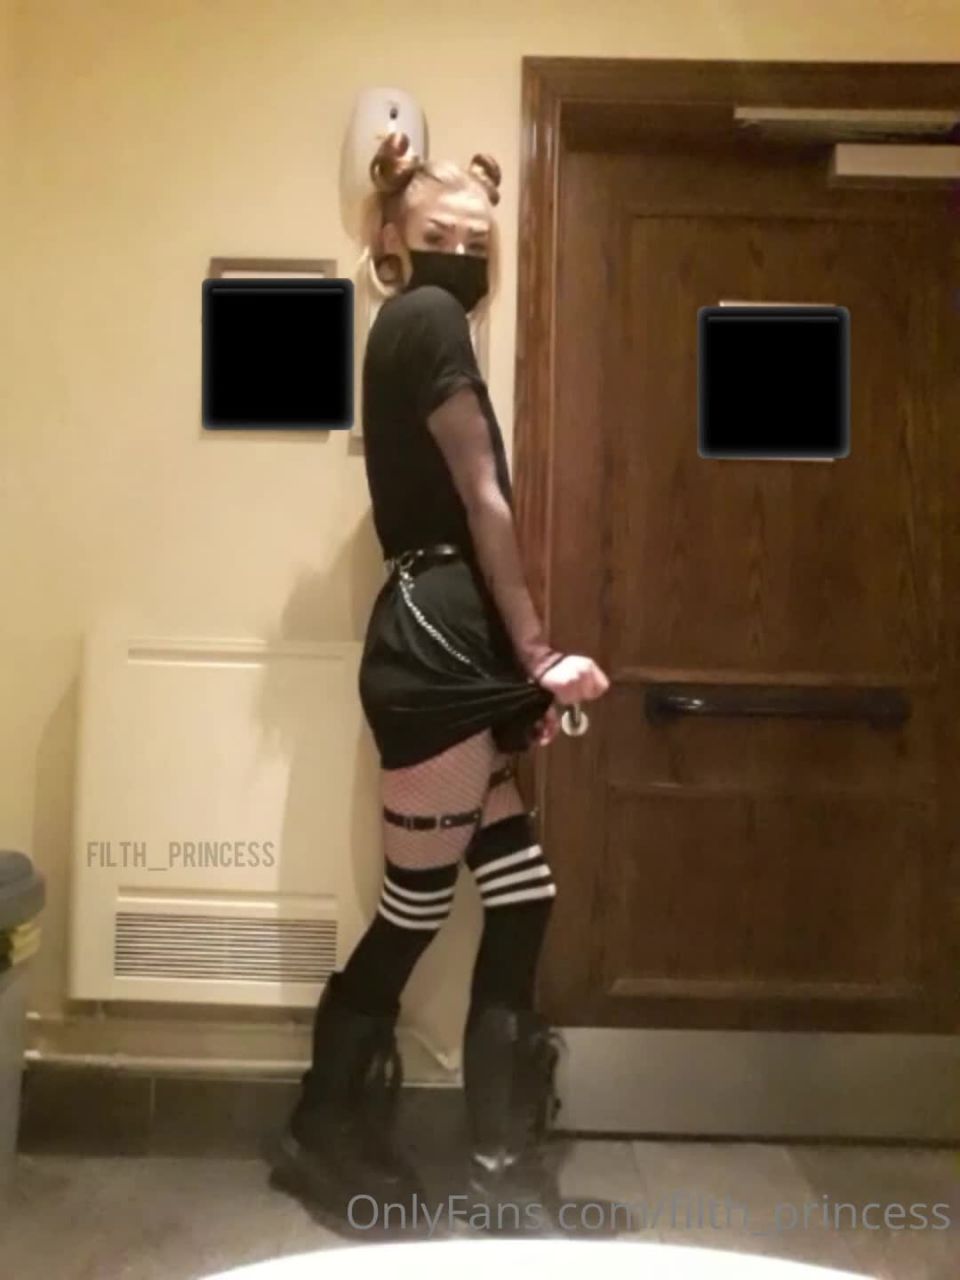 FilthPrincess () Filthprincess - ive been working my little butt off and i hate it only one more week of stupid hours l 24-04-2021